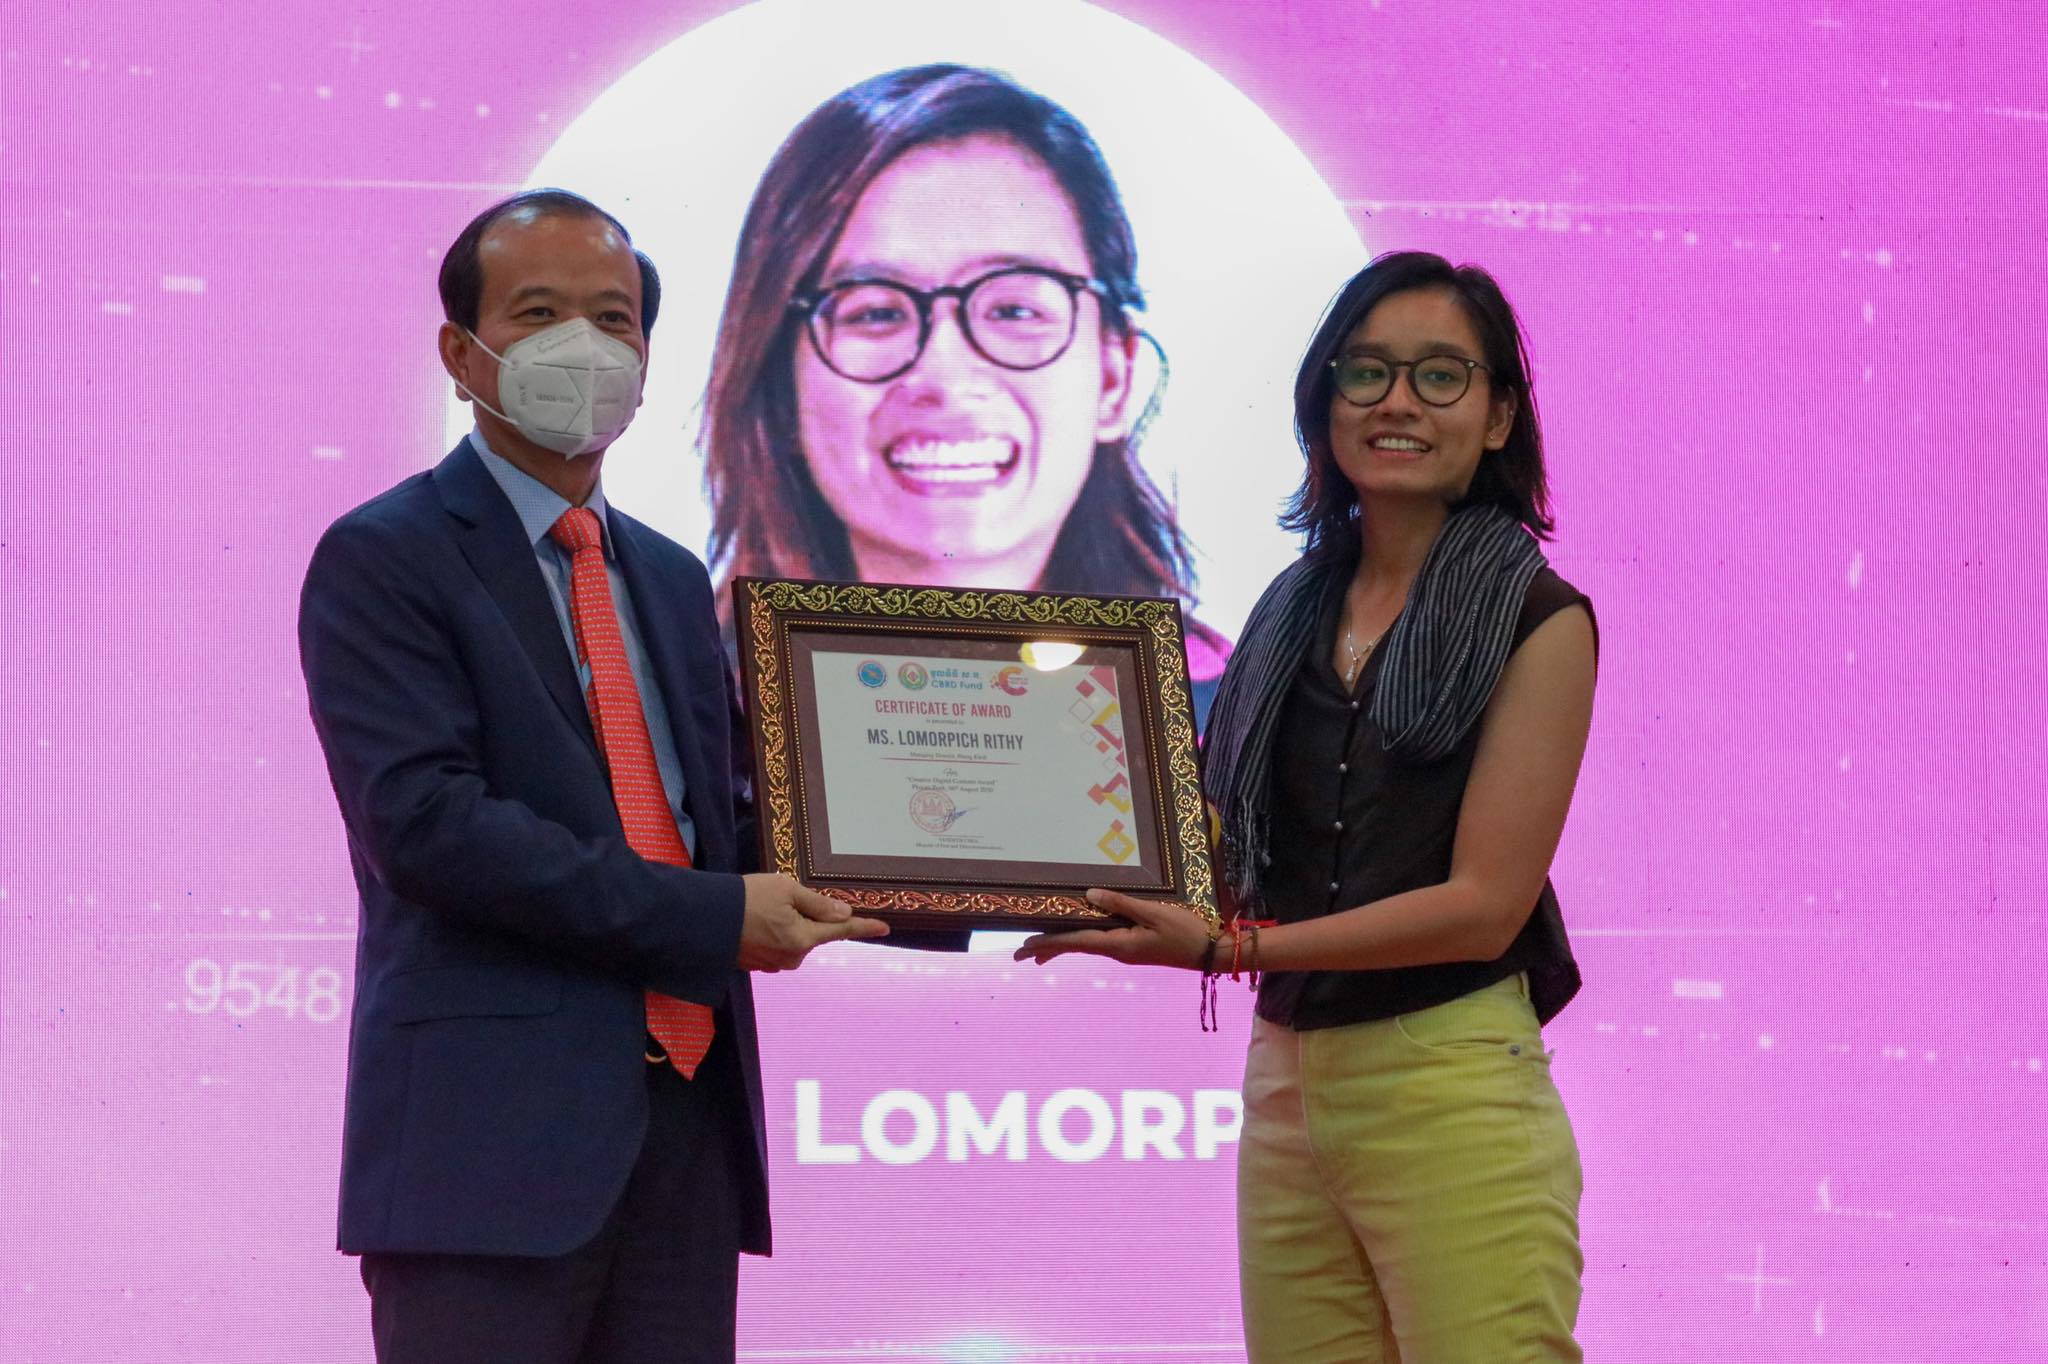 The Women of Creative Content Award (Creative Digital Content Award) went to Miss Rithy Lomor Pich